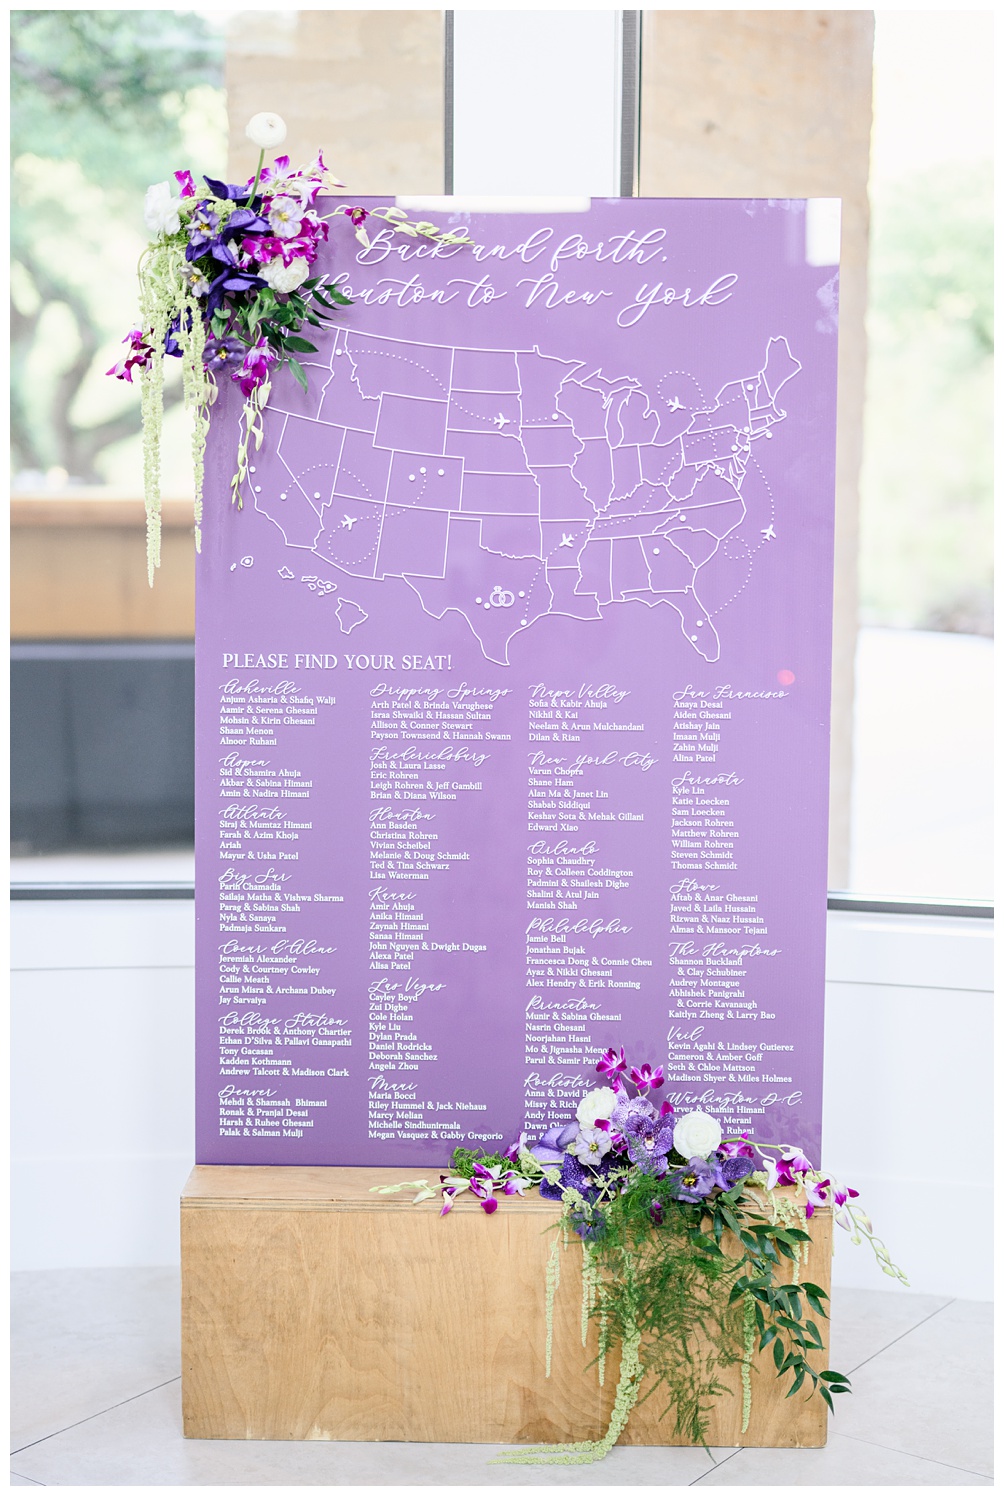 Wedding Seating Chart in purple and white by The Inviting Pear stationery out of Austin Texas